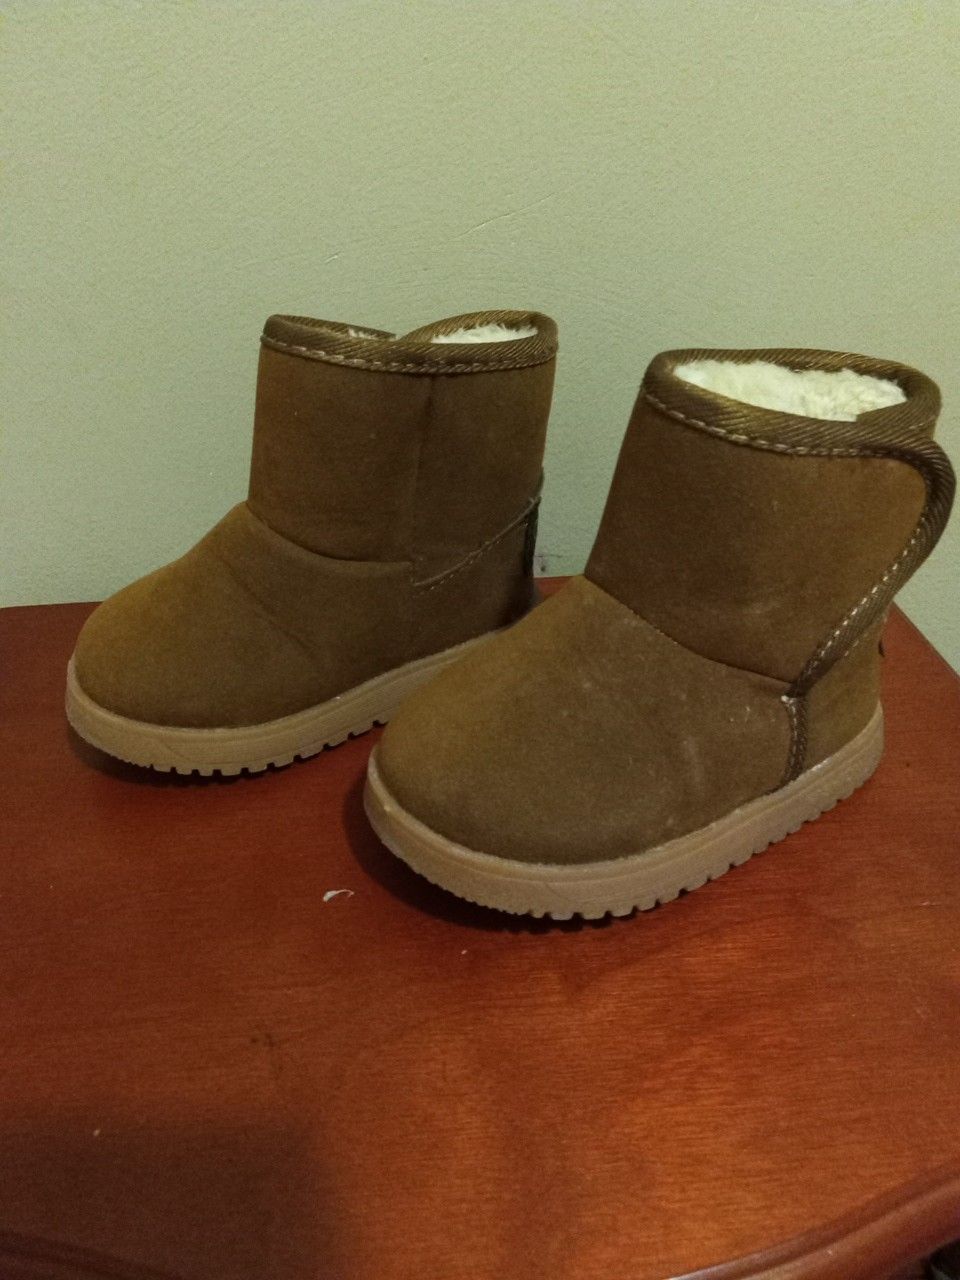 Ugg style girls boots size 4/5 toddler